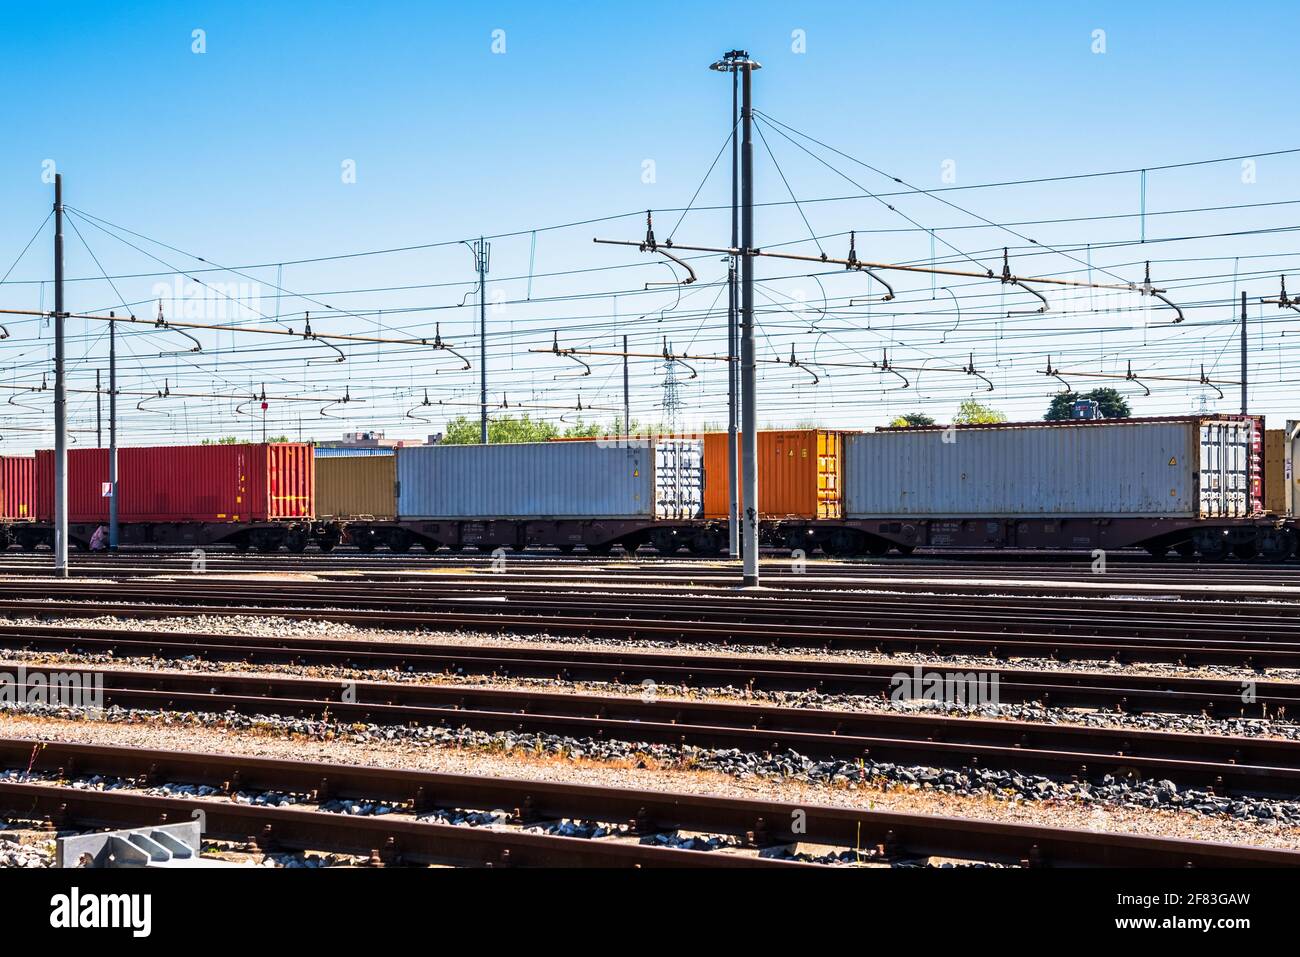 Cargo trains loaded with colourful containers in a freight terminal Stock Photo